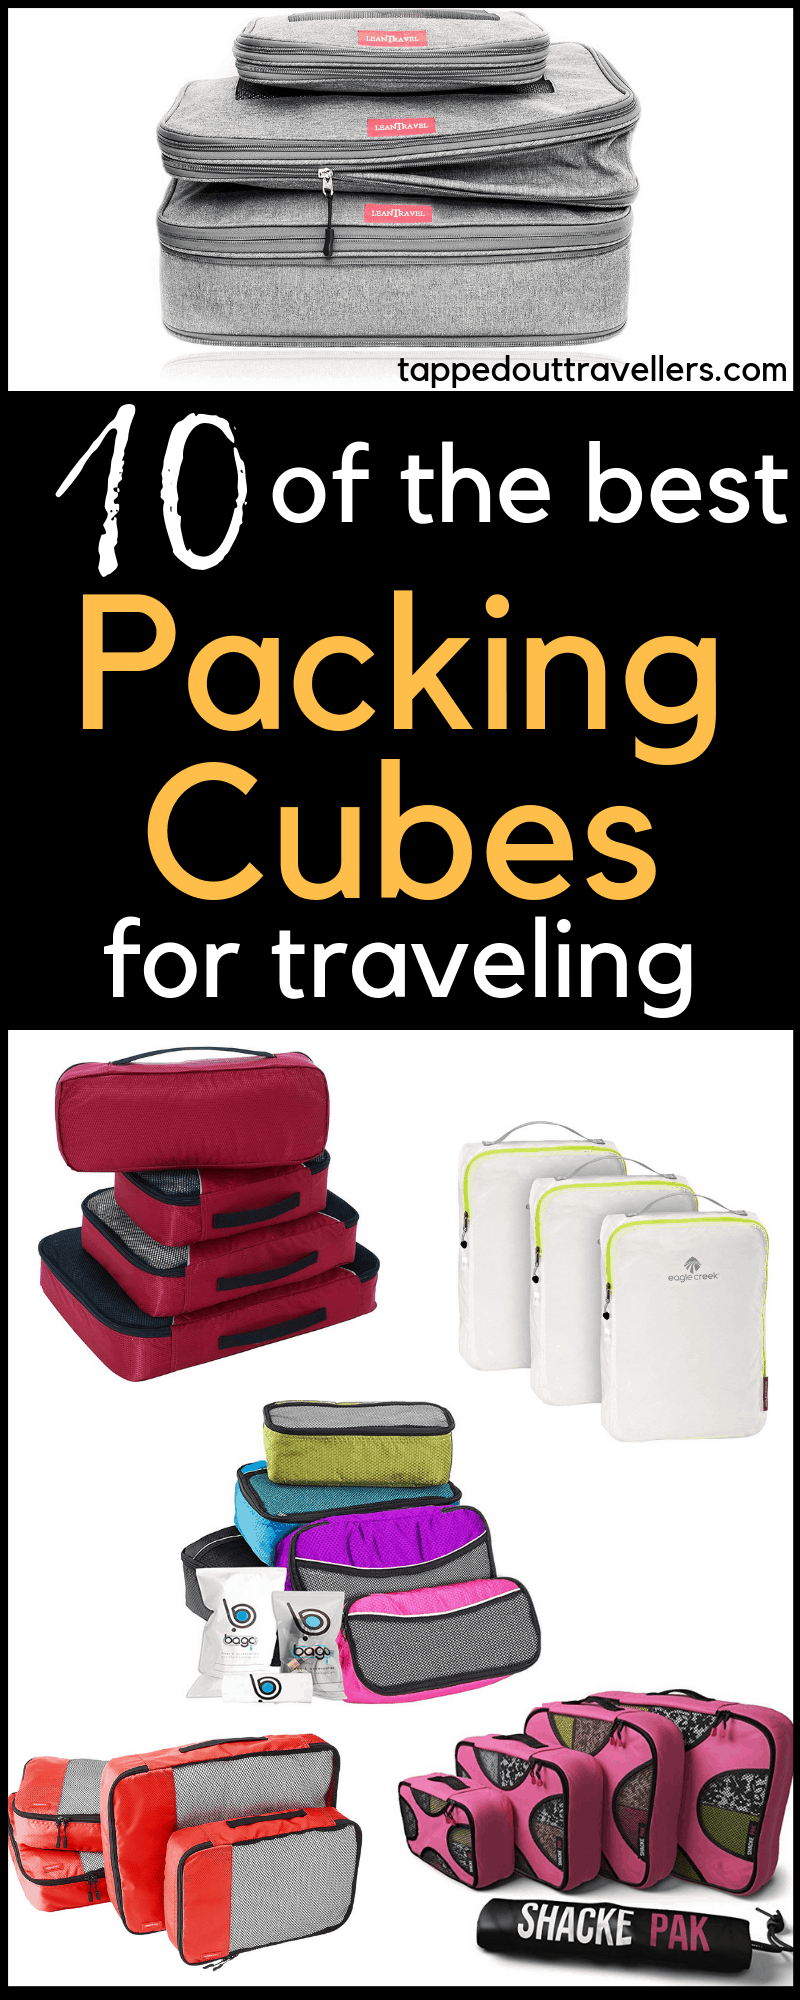 Are Packing Cubes Worth It? Well, they certainly have big advantages, not least because they offer you a little bit of order within the jumbled mess that can be your suitcase. Here are our suggestions for the best packing cubes.